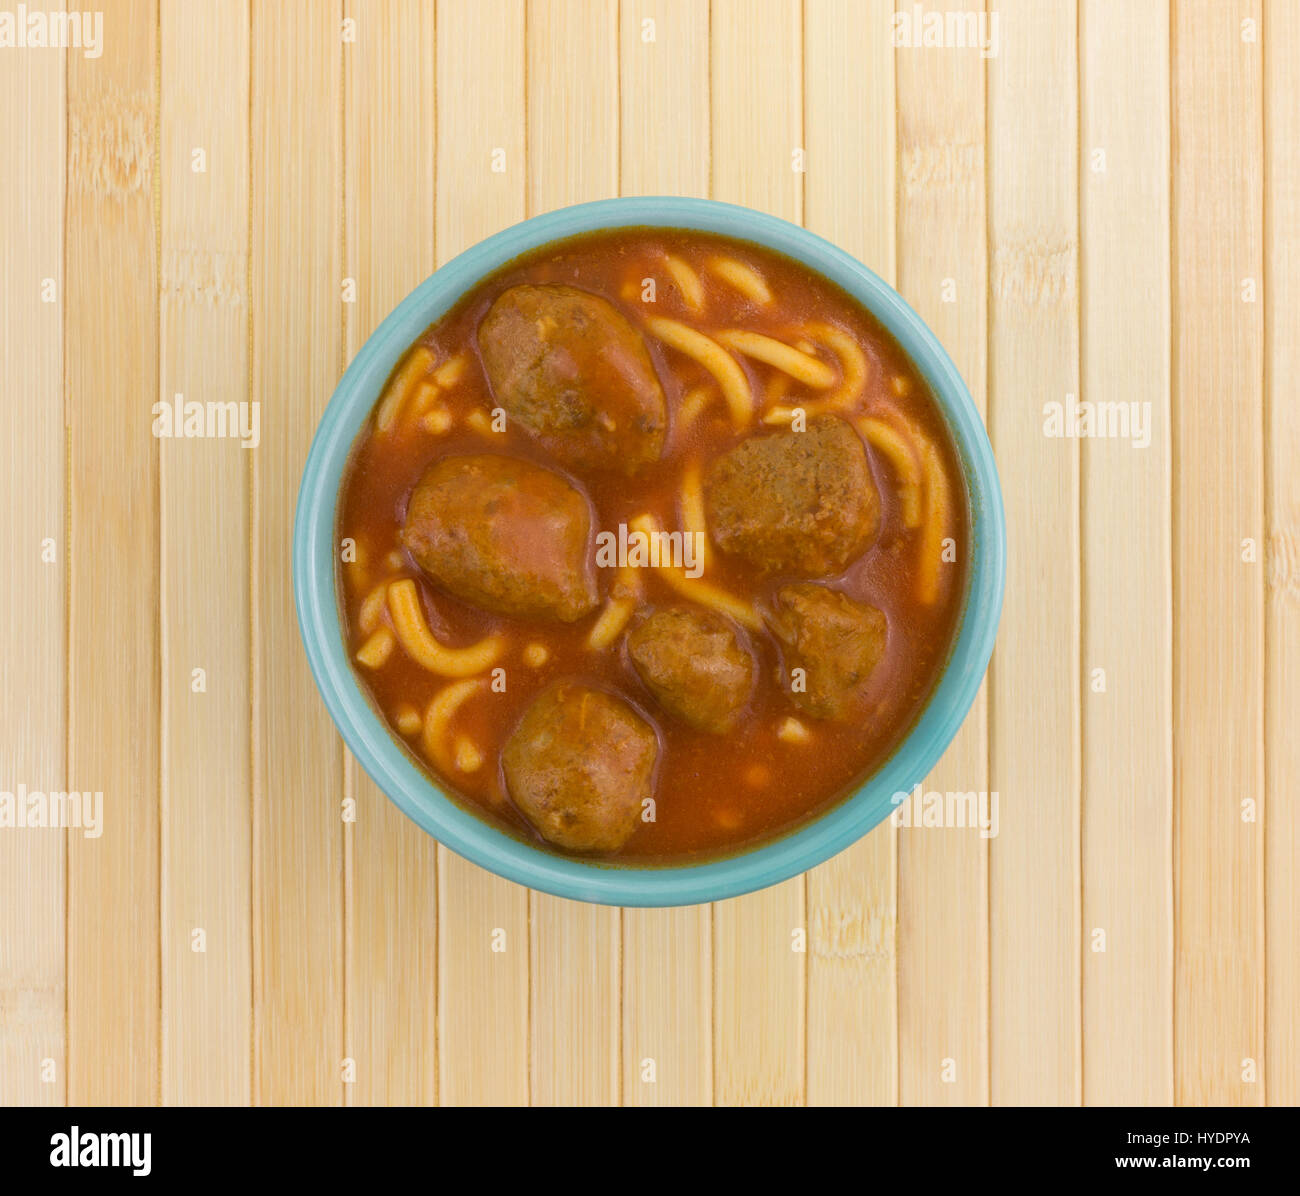 Top view of a serving of spaghetti and meatballs in a bowl on a wood place mat. Stock Photo